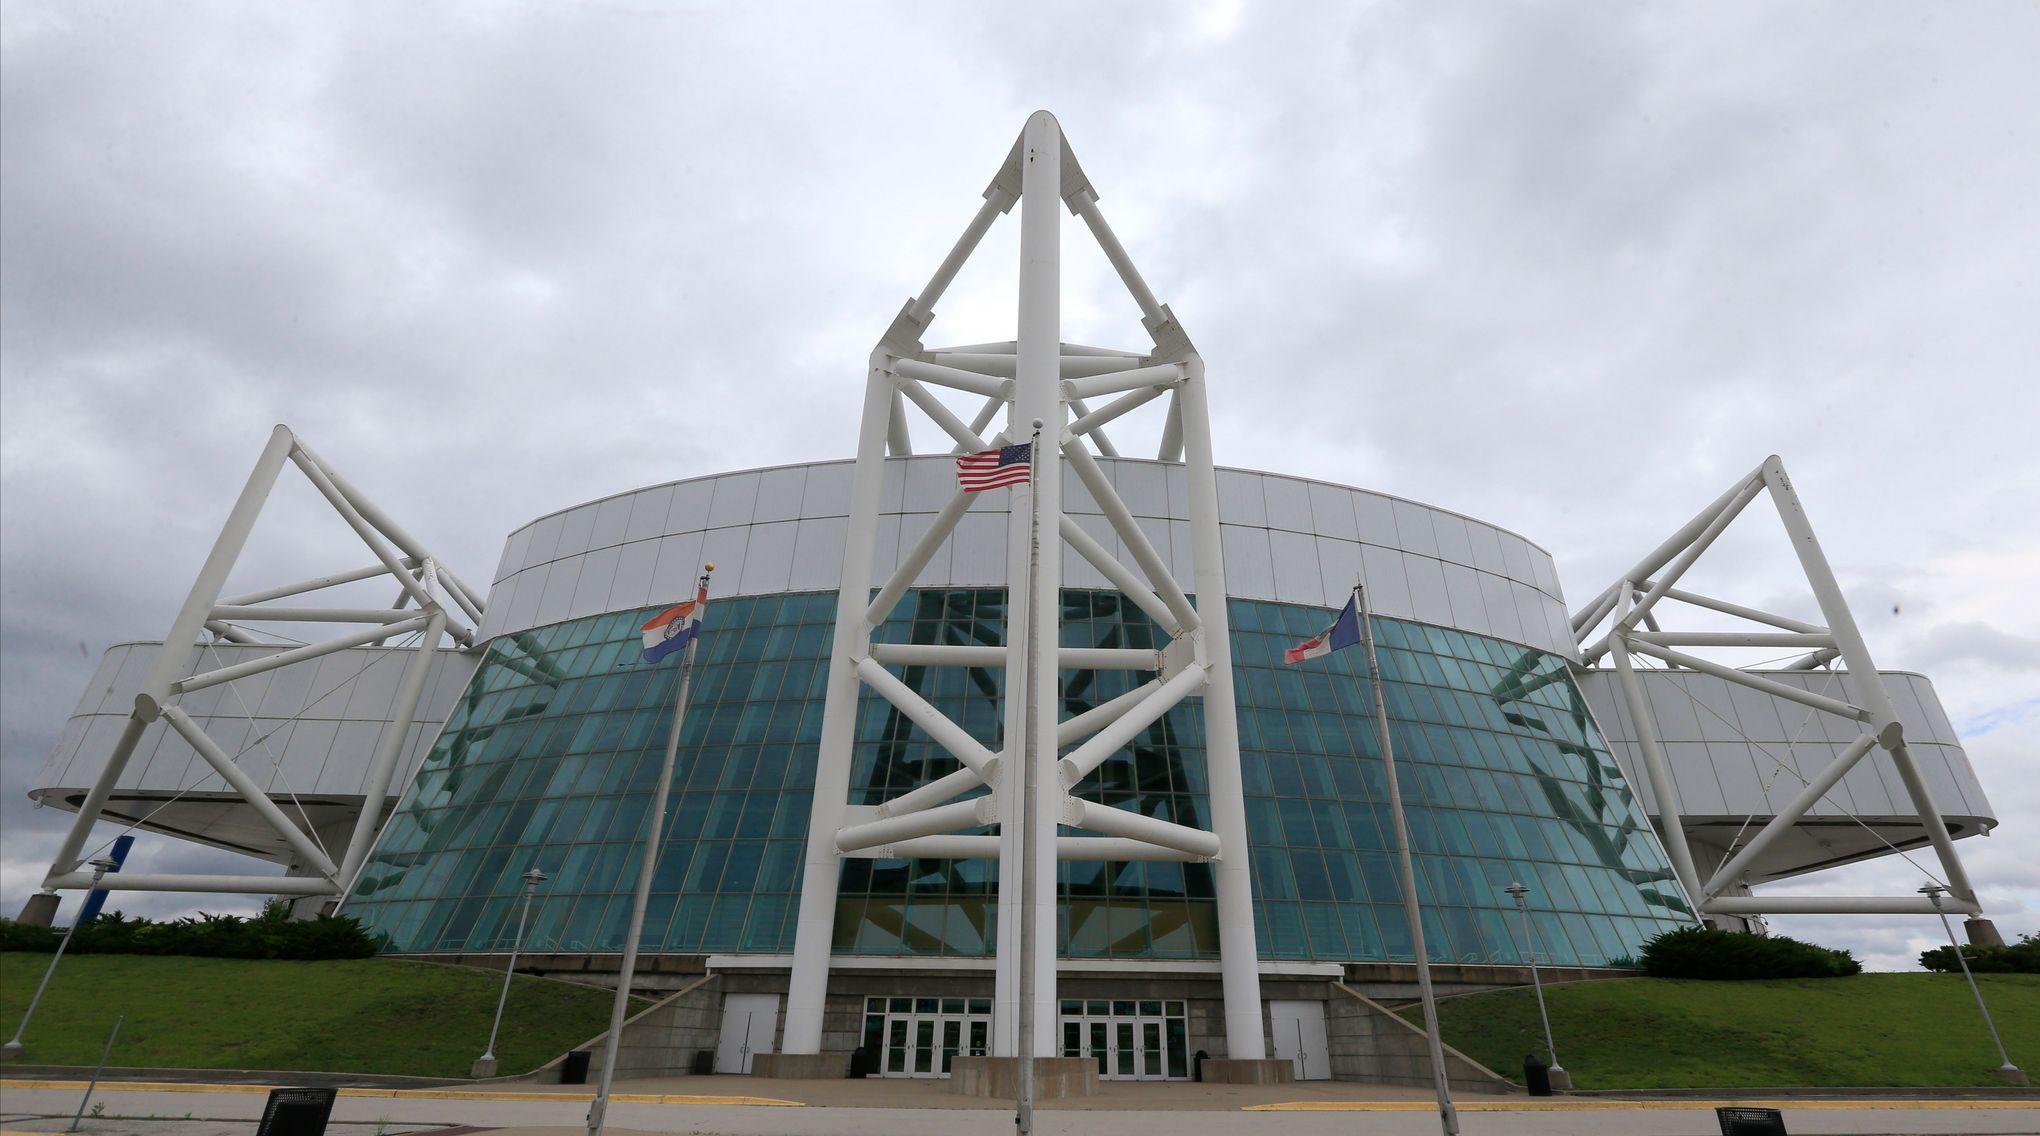 Here's what you didn't know about the Hy-Vee Arena in Kansas City